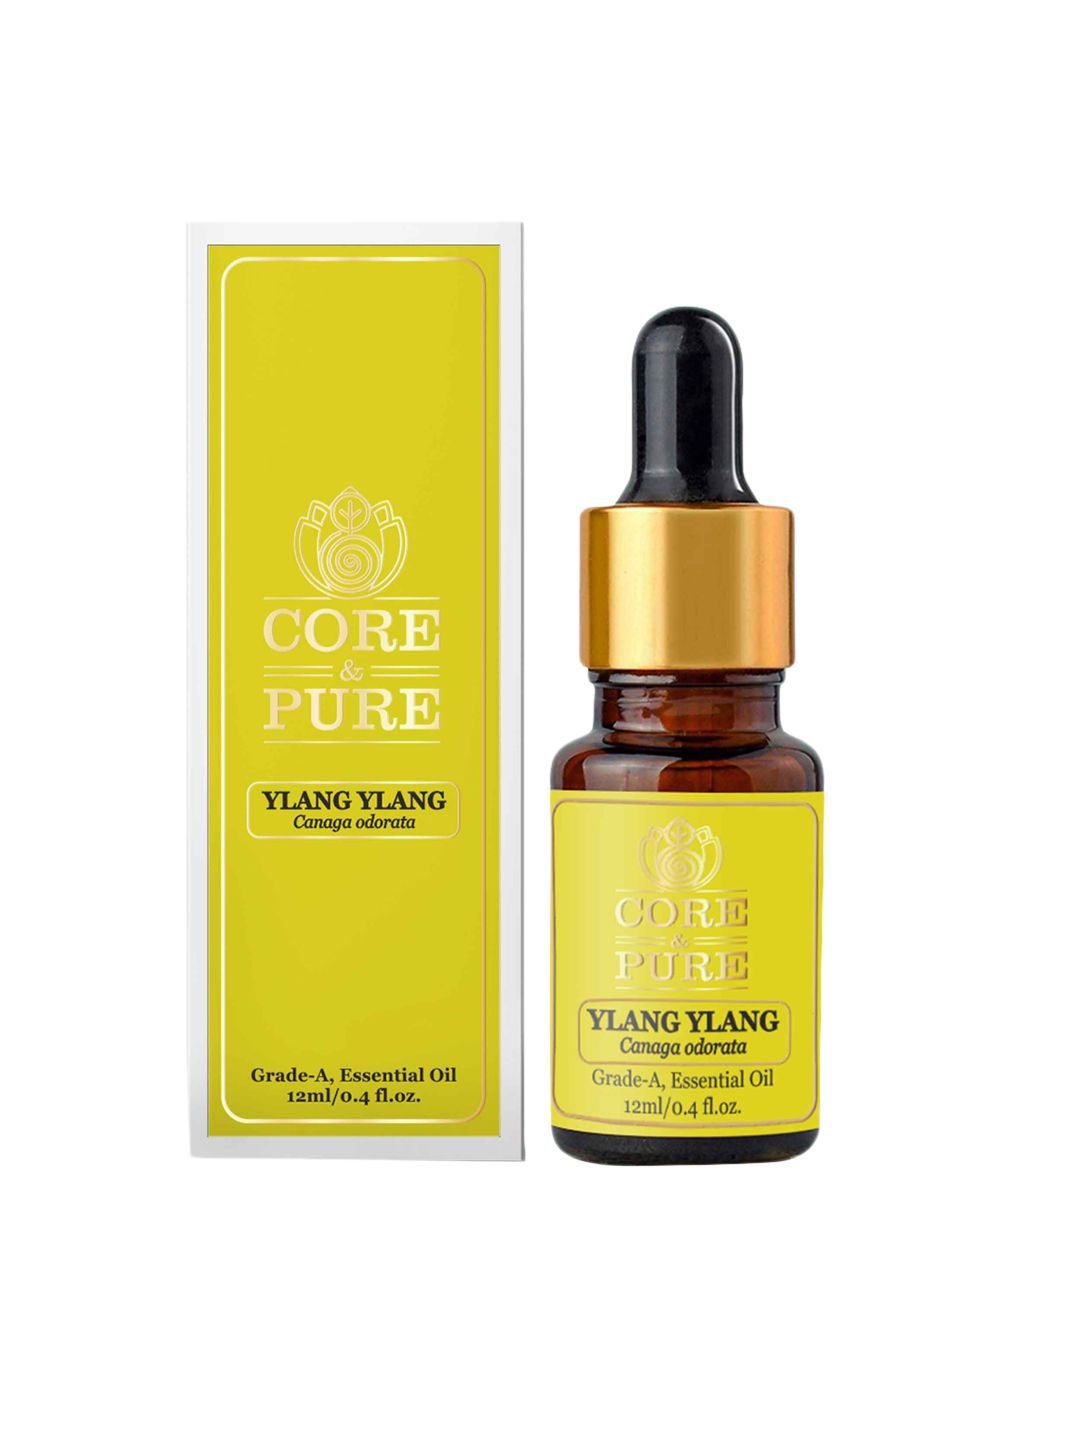 CORE & PURE Unisex Ylang Ylang Grade-A Essential Oil Price in India